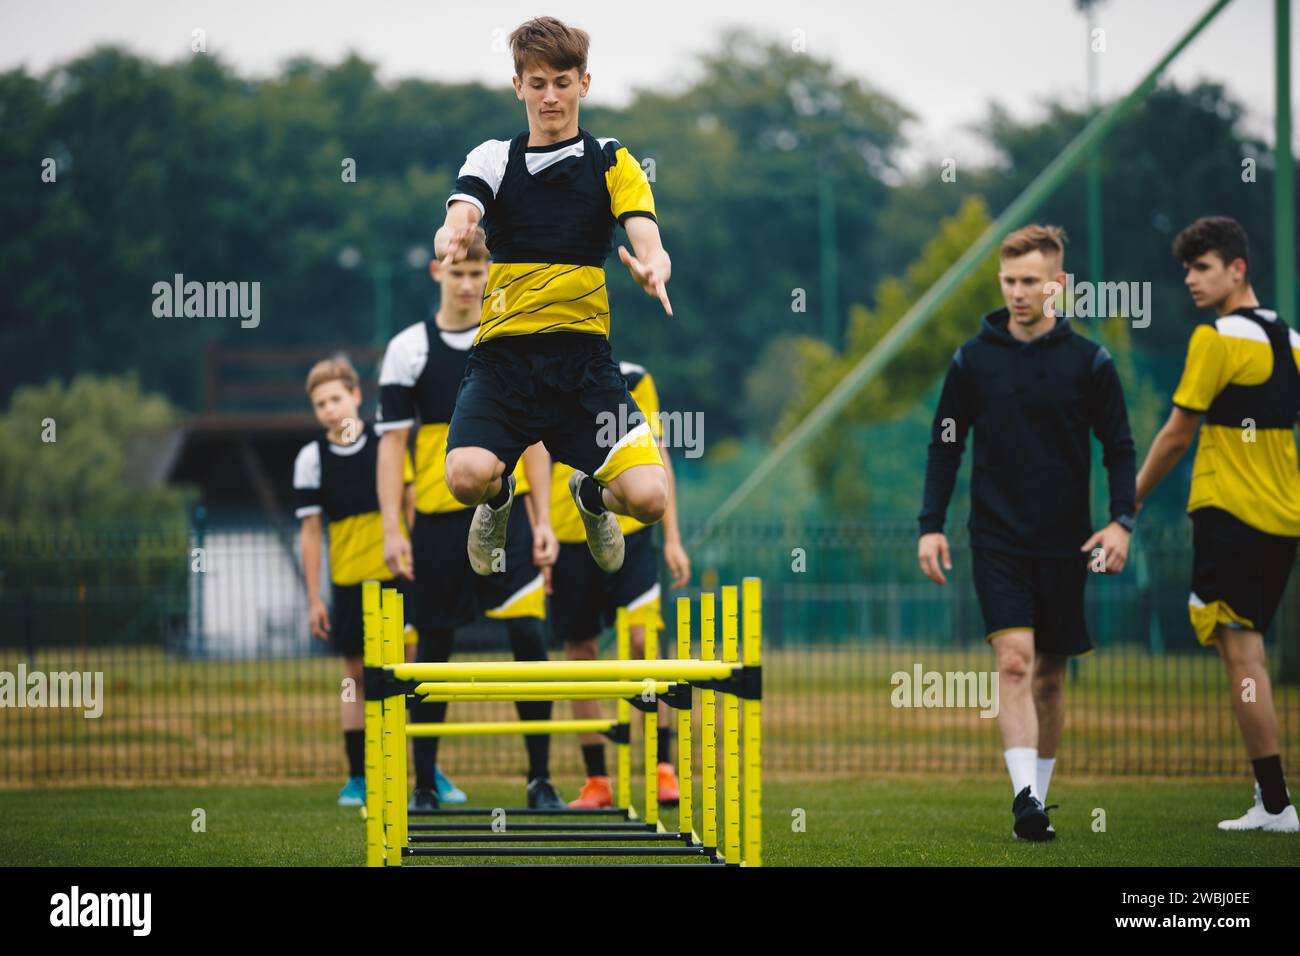 Football camp for youth. Teenage boys in training with a coach at grass pitch. Sports team preparing for the season. Young players jumping over hurdle Stock Photo